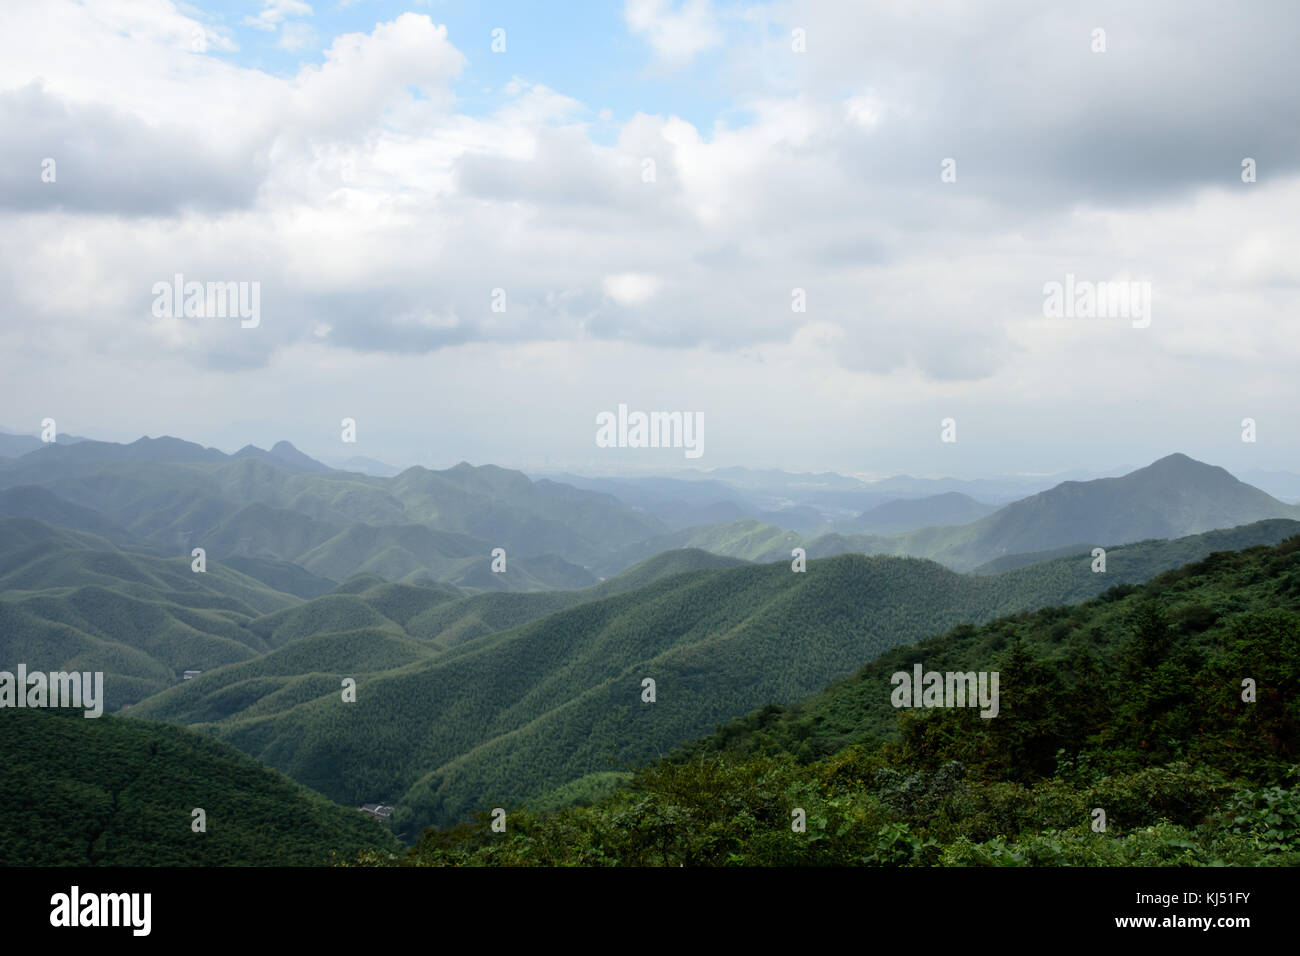 View over bamboo forest mountain valley at Moganshan in China Stock Photo